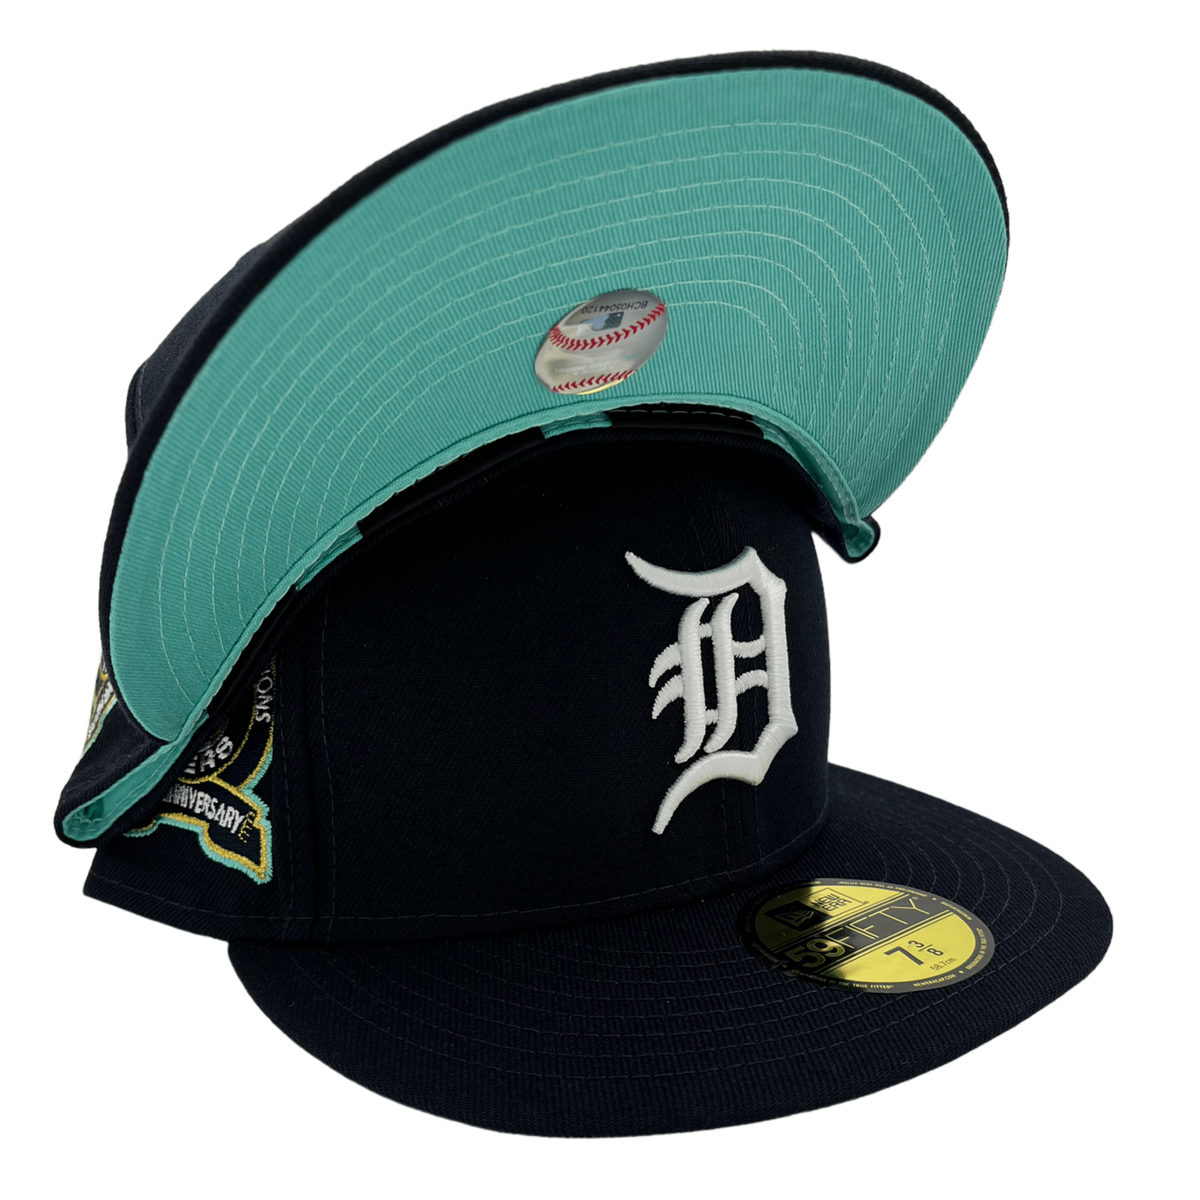 DETROIT STARS AMERICAN LEAGUE (NAVY) NEW ERA 59FIFTY FITTED (GREEN